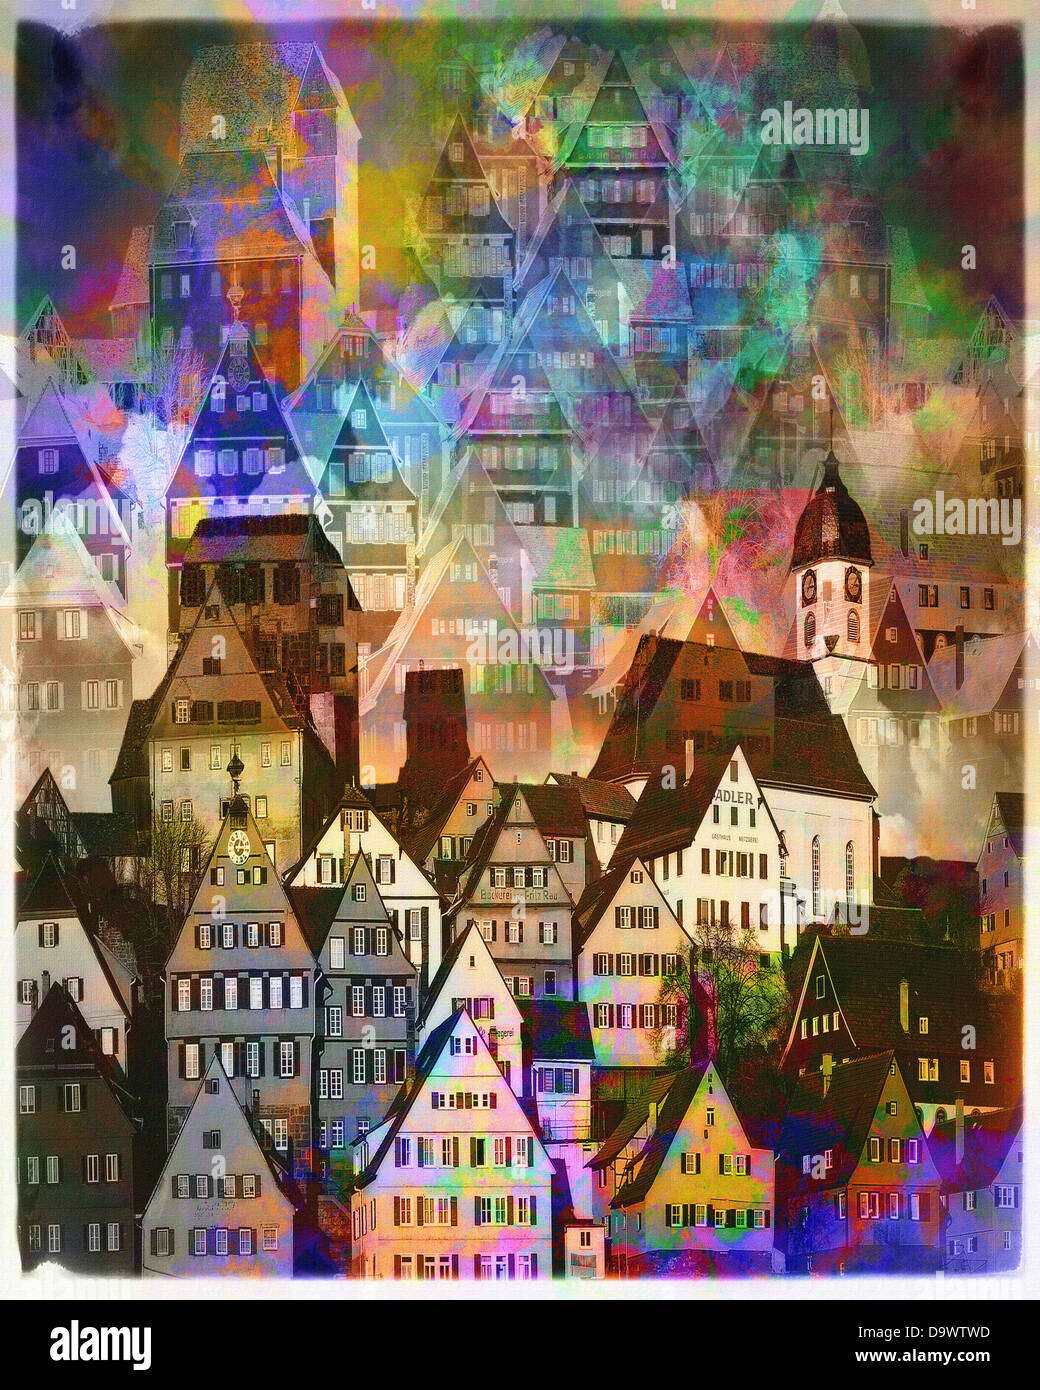 Digital Art: Our Old Town (Image based on Altensteig in Germany) Stock Photo